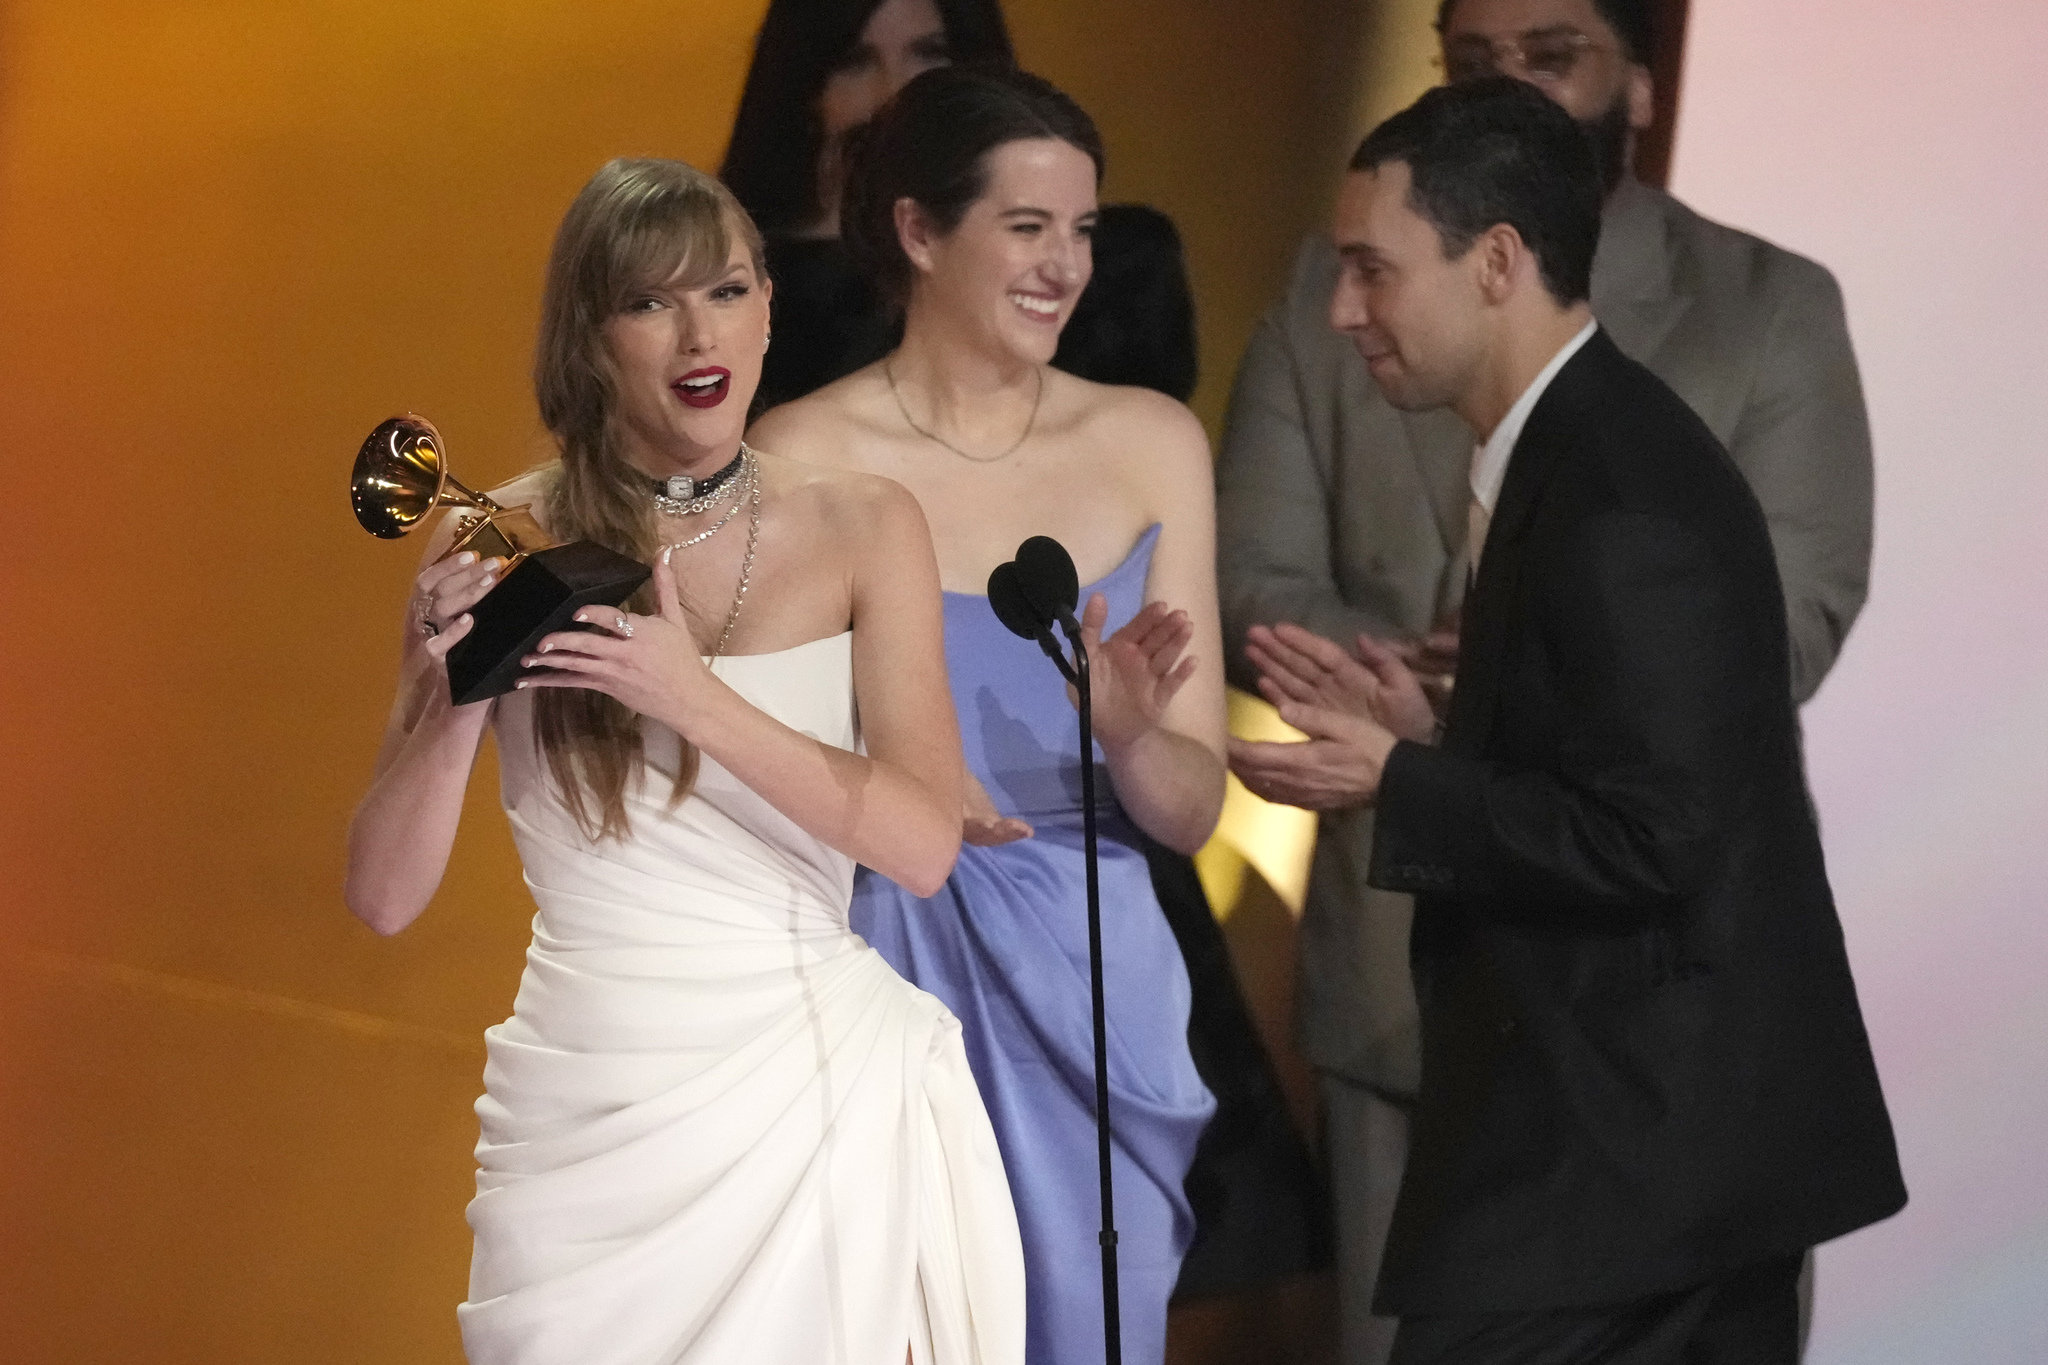 Swift collects her award.